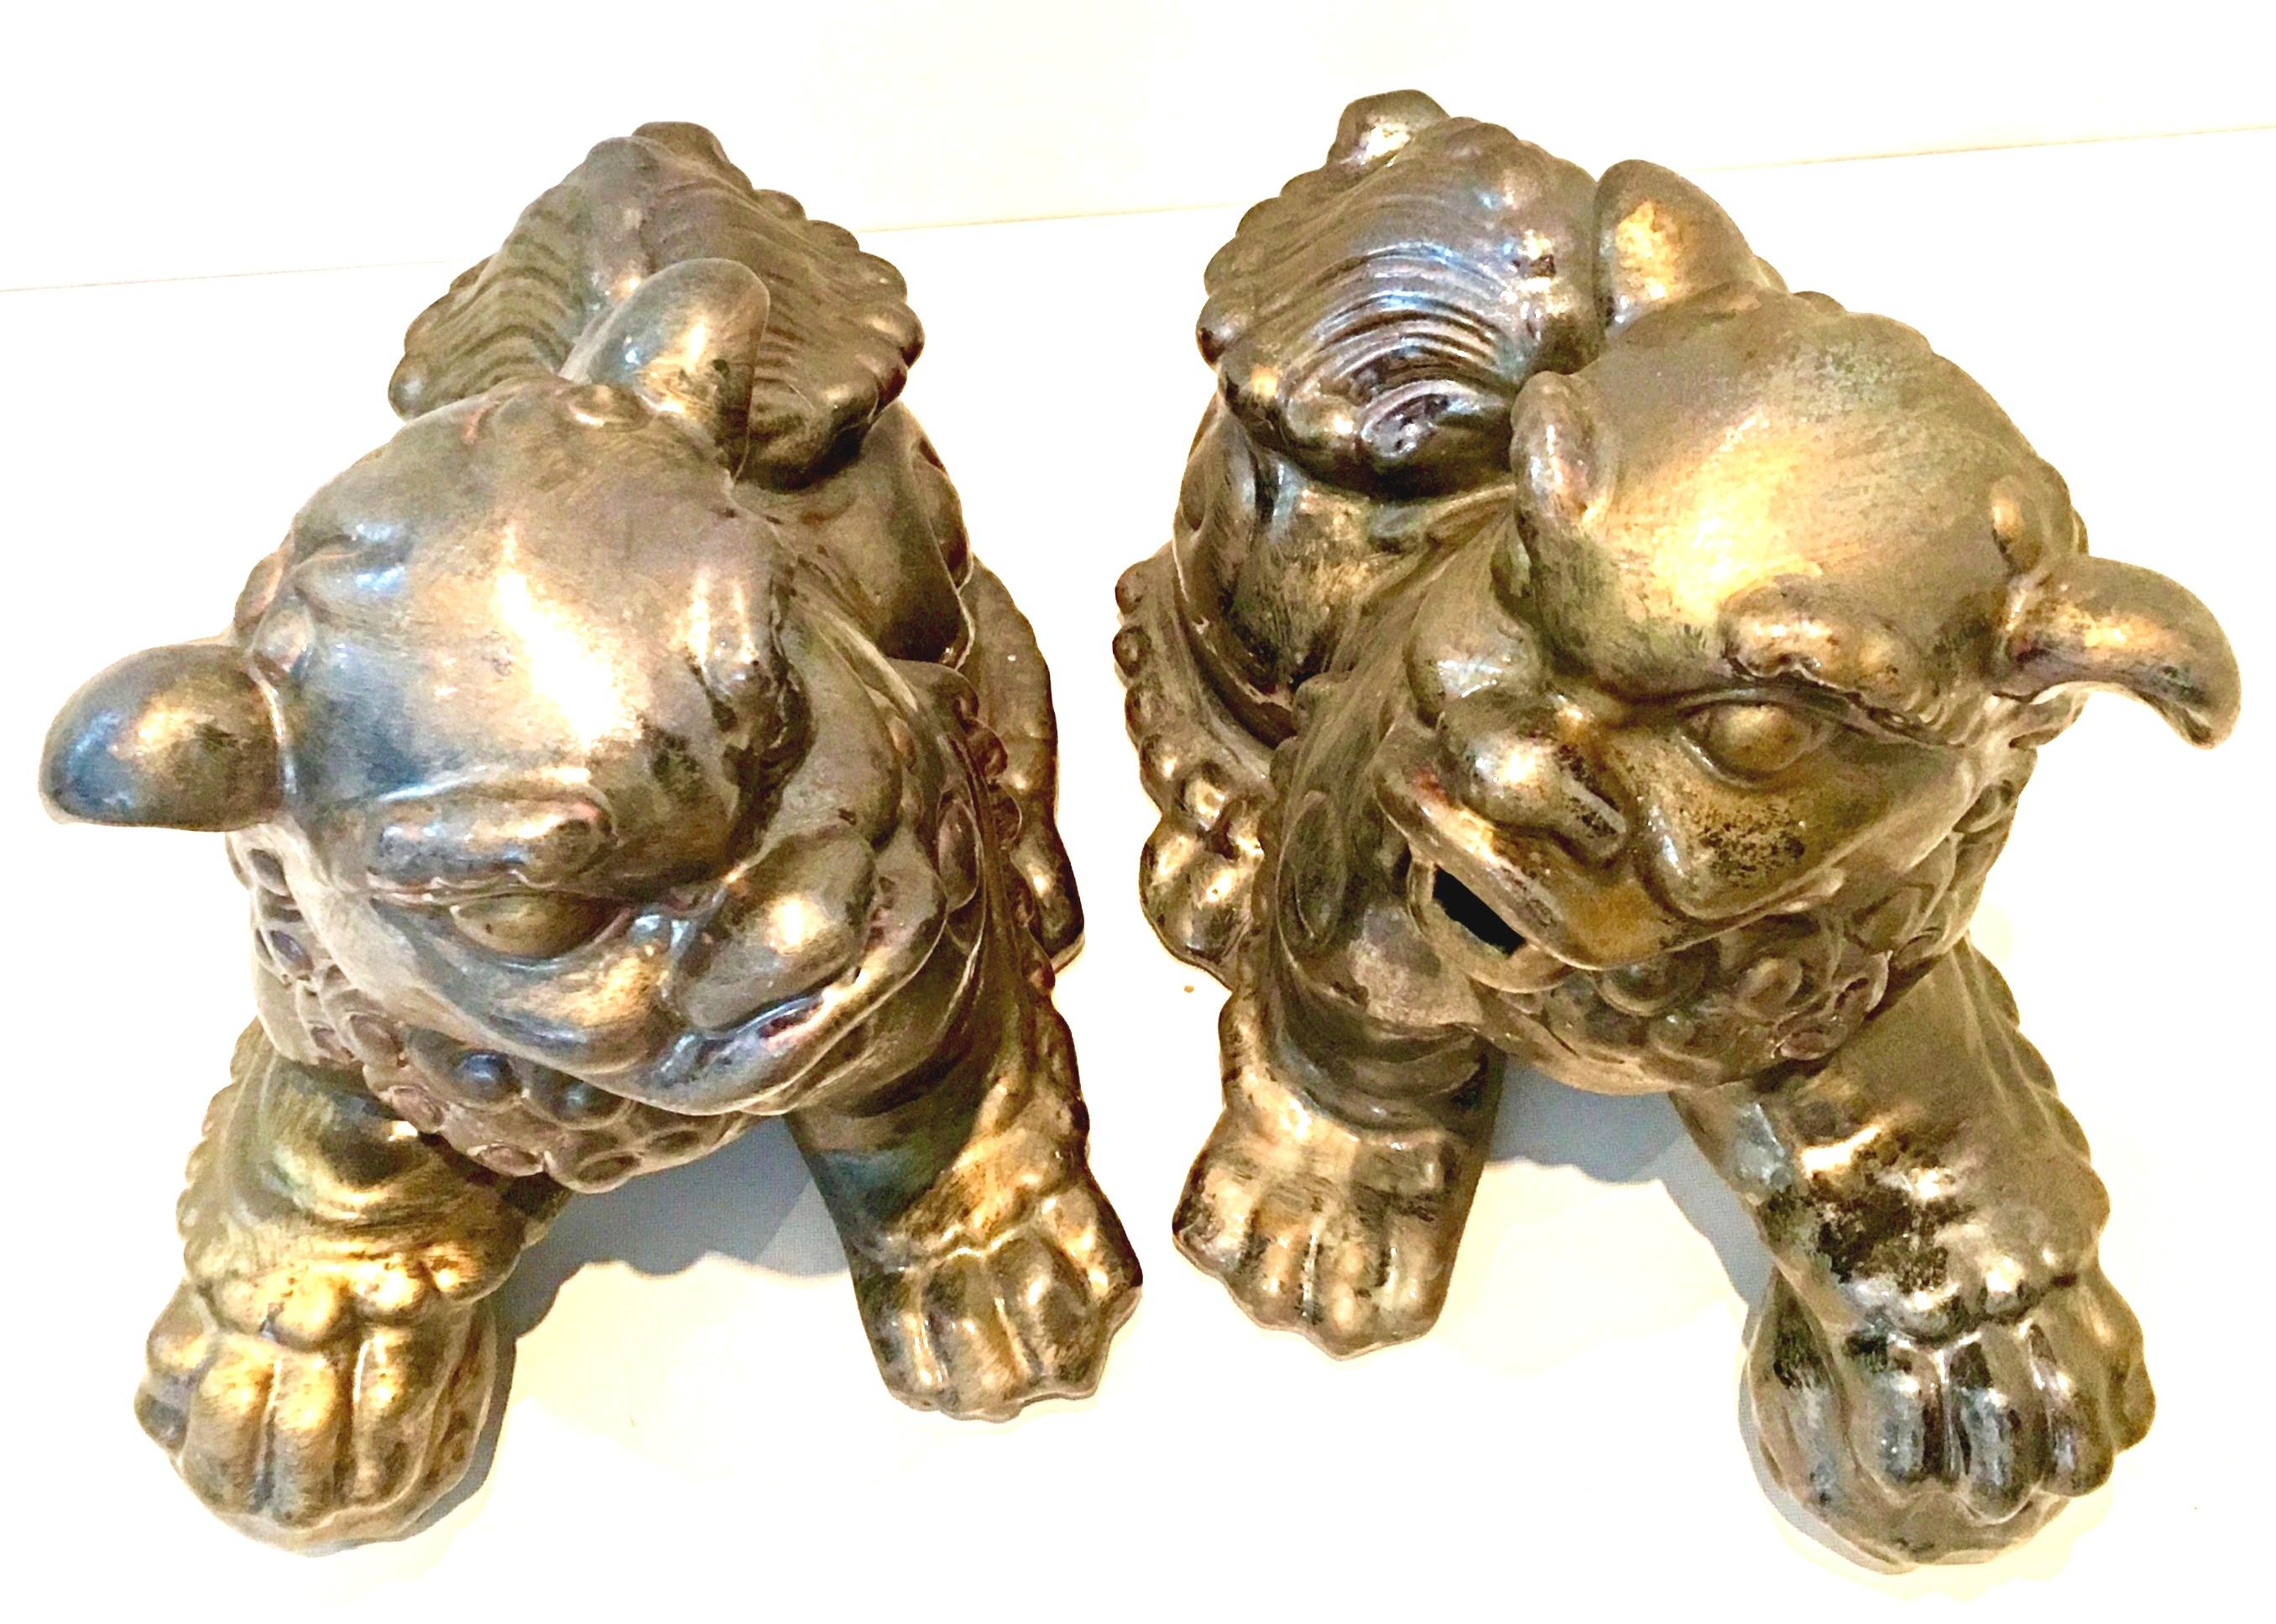 Chinese Export 21st Century Pair of Contemporary Gold Gilt Ceramic Glaze Foo Dog Sculptures For Sale